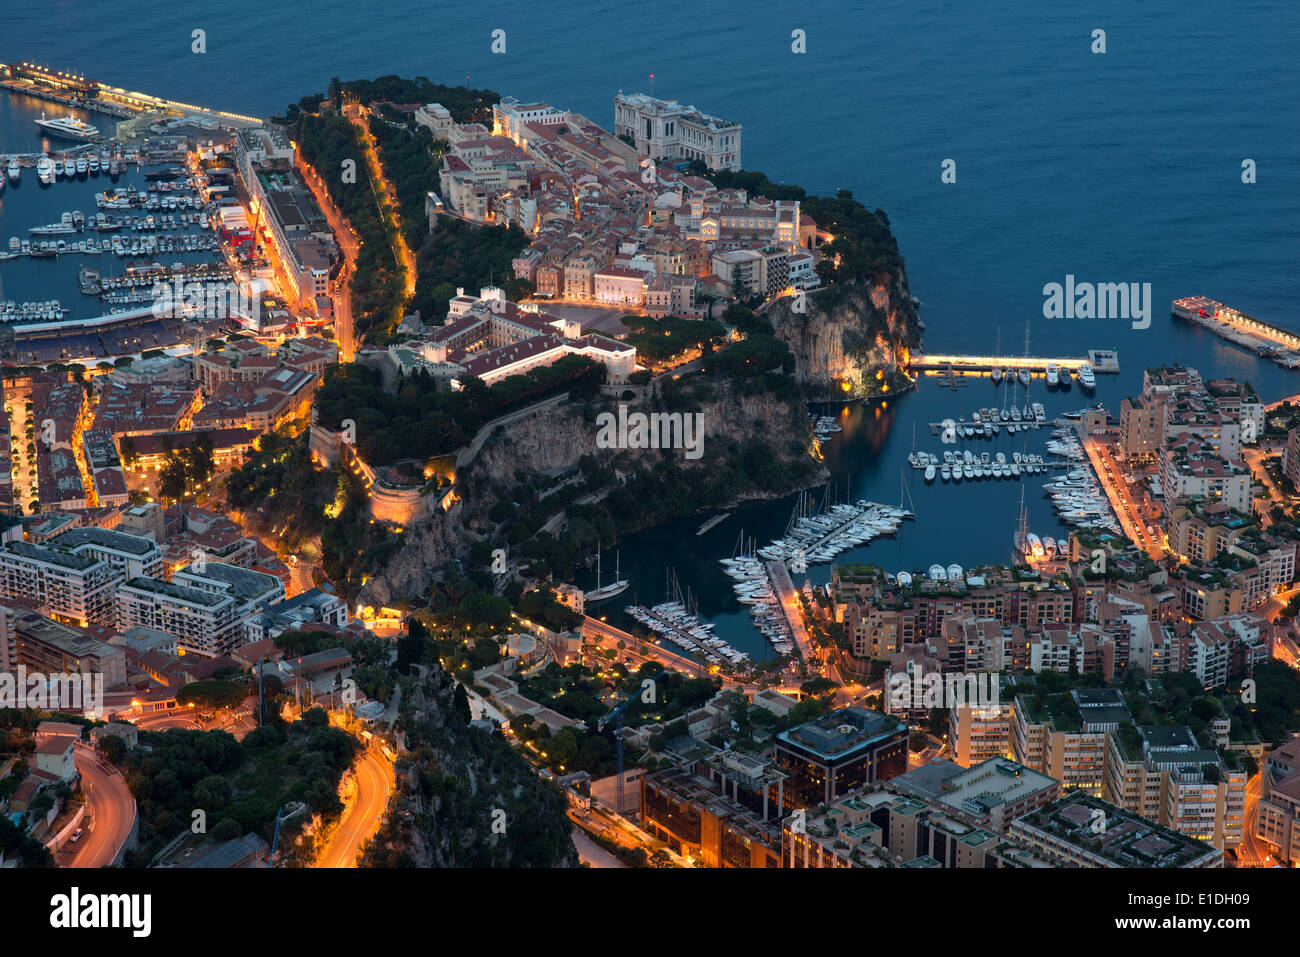 The ward of Monaco-Ville with the Prince's Palace and the Oceanographic Museum, the two most prominent buildings. Principality of Monaco. Stock Photo